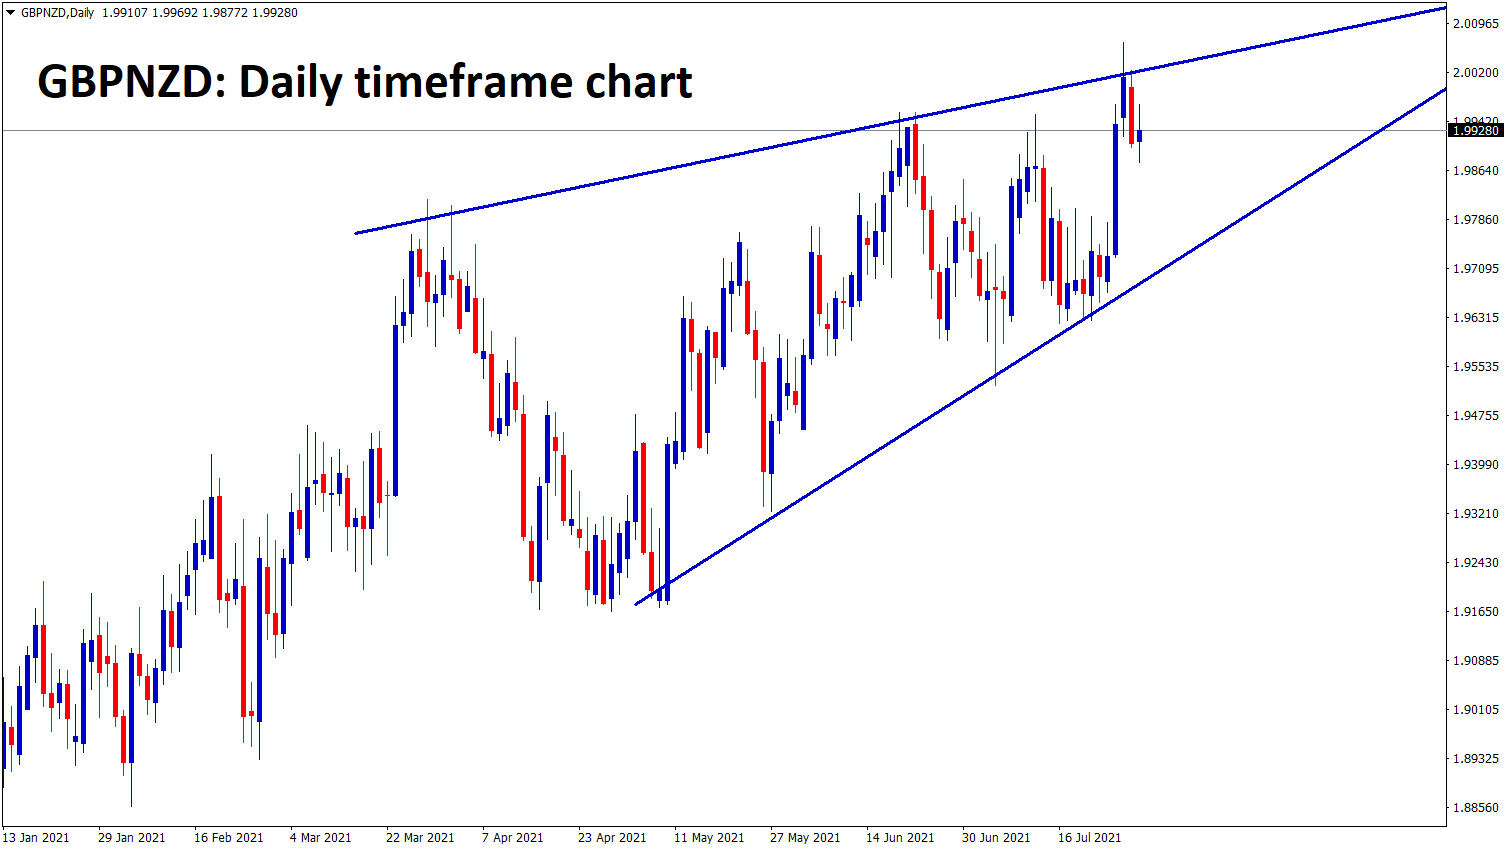 GBPNZD has formed a rising wedge pattern in the d1 timeframe